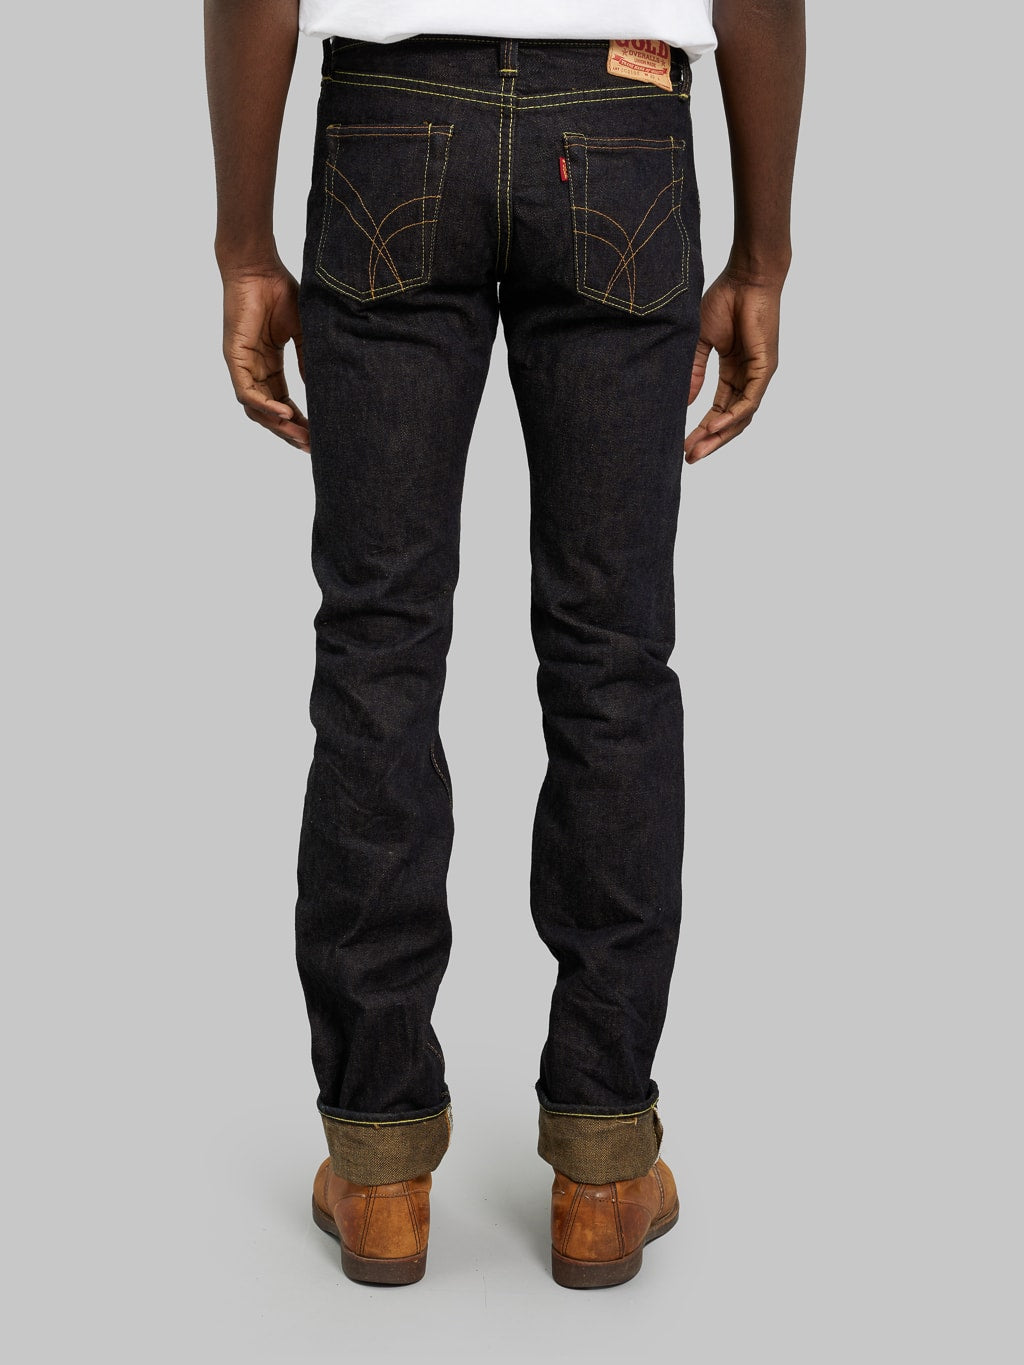 The Strike Gold Brown Weft Slim Jeans back rise